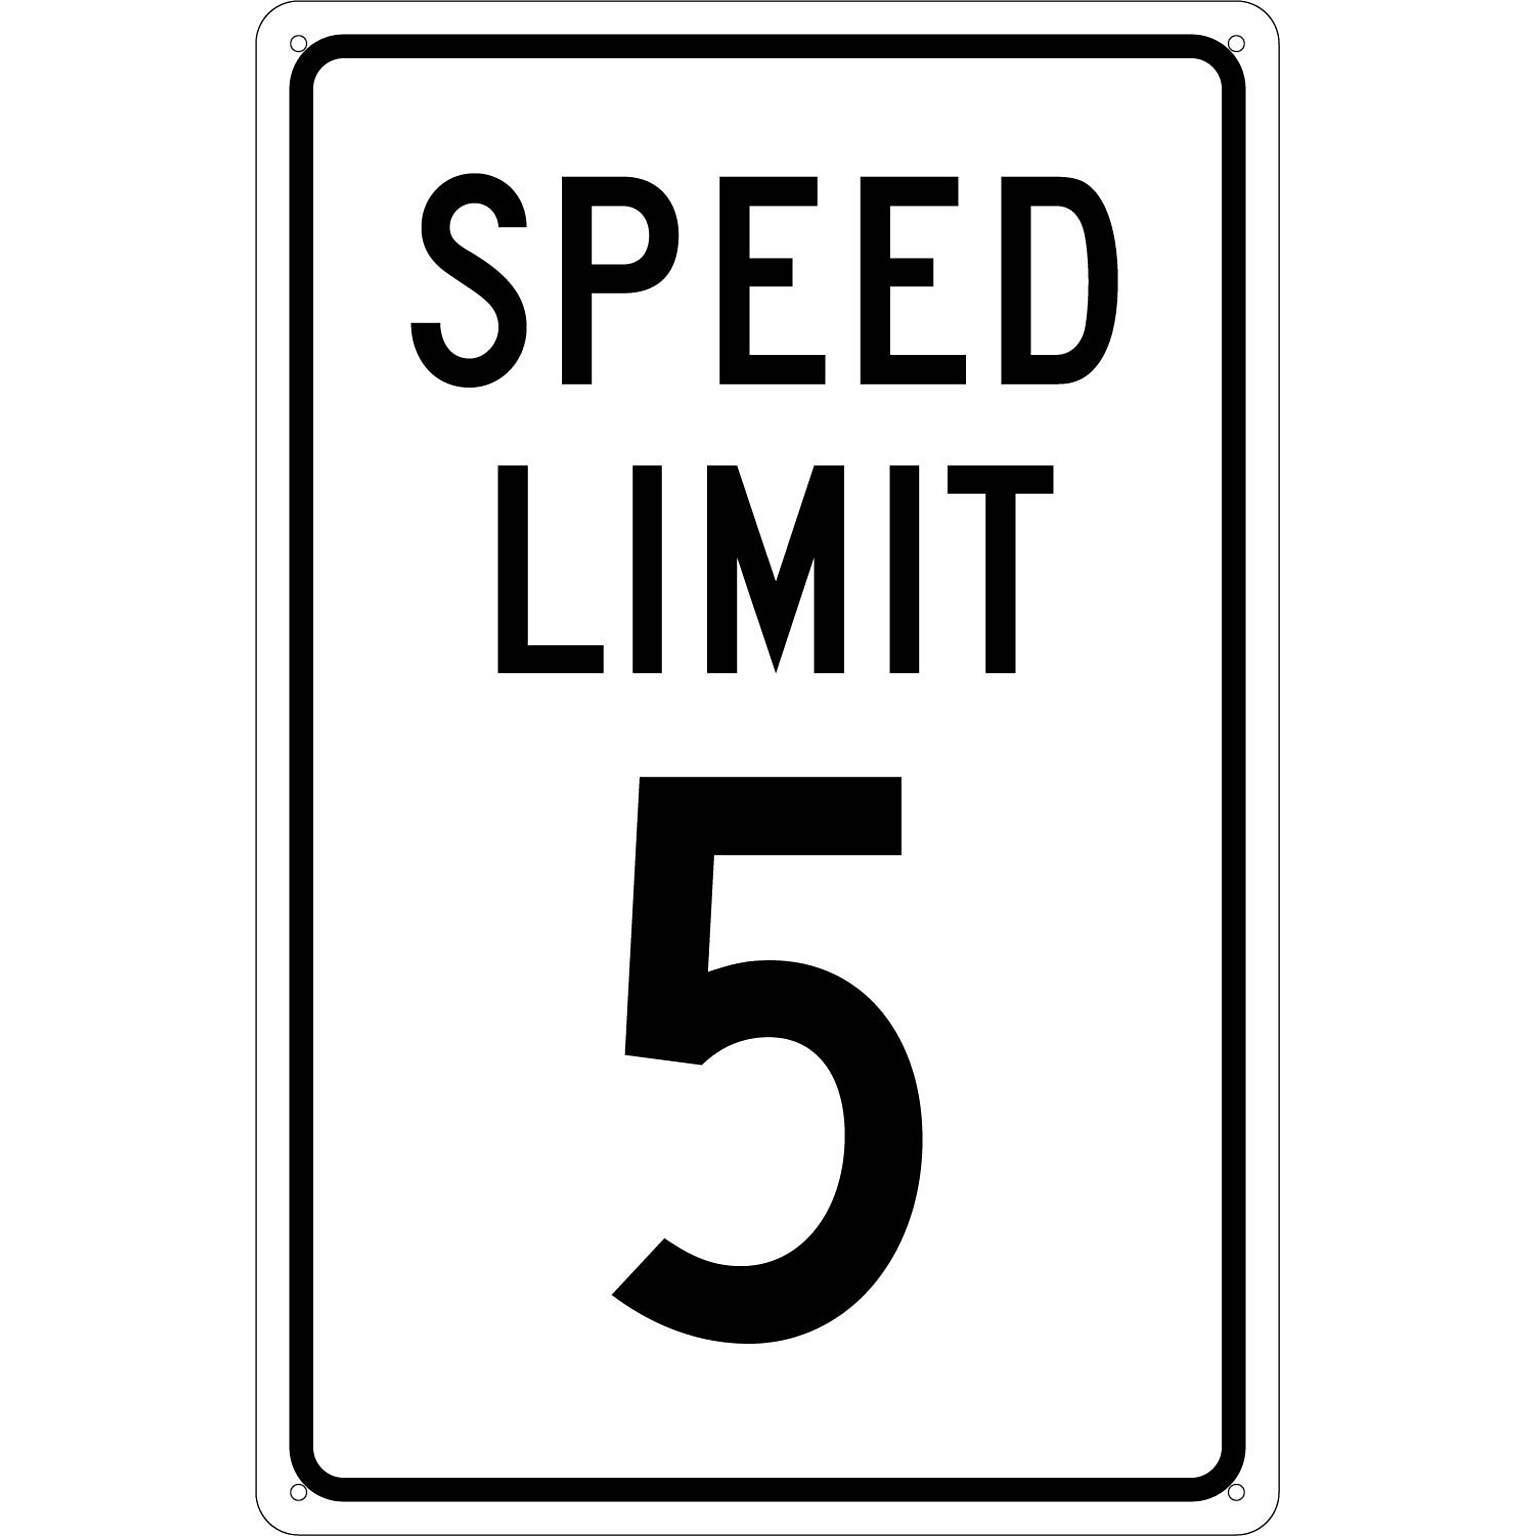 National Marker Reflective Speed Limit 5 Speed Control Sign, 18 x 12, Aluminum (TM17G)